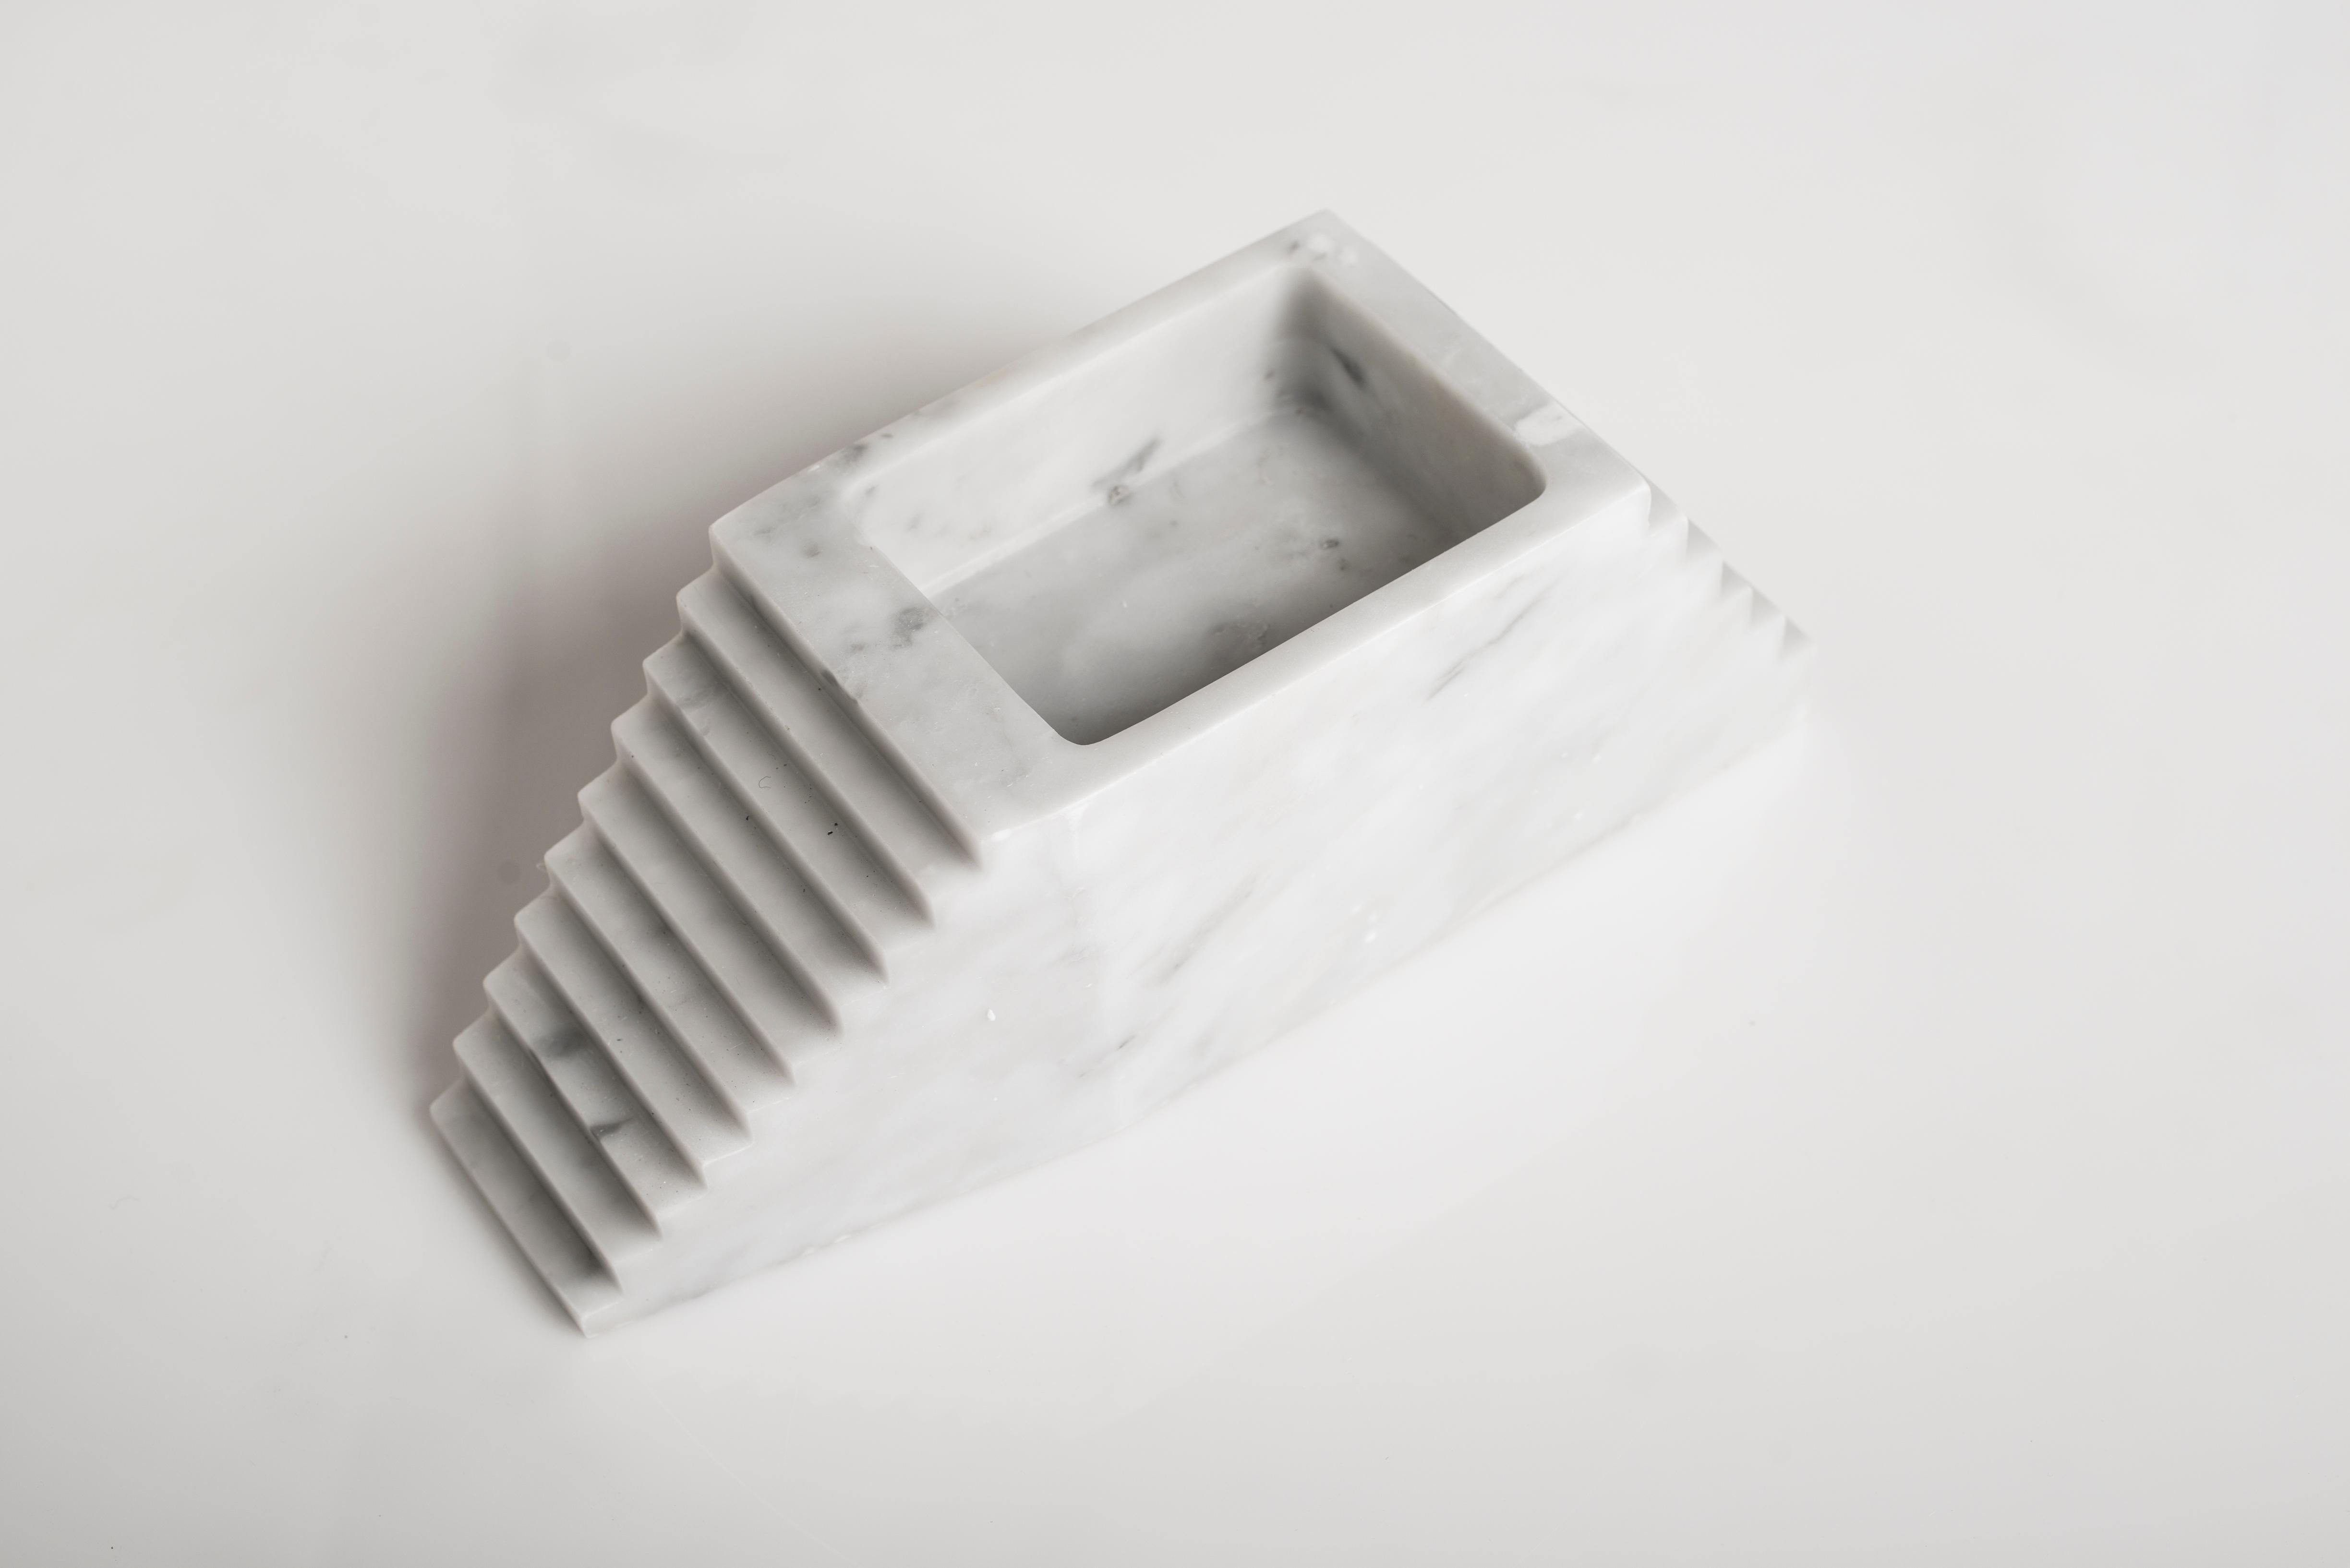 Moscow Sculpture by Carlo Massoud
Handmade 
Dimensions: D 10 x W 30 x H 10 cm 
Materials: Carrara Marble

Carlo Massoud’s work stems from his relentless questioning of social, political, cultural, and environmental norms. He often pushes his viewers